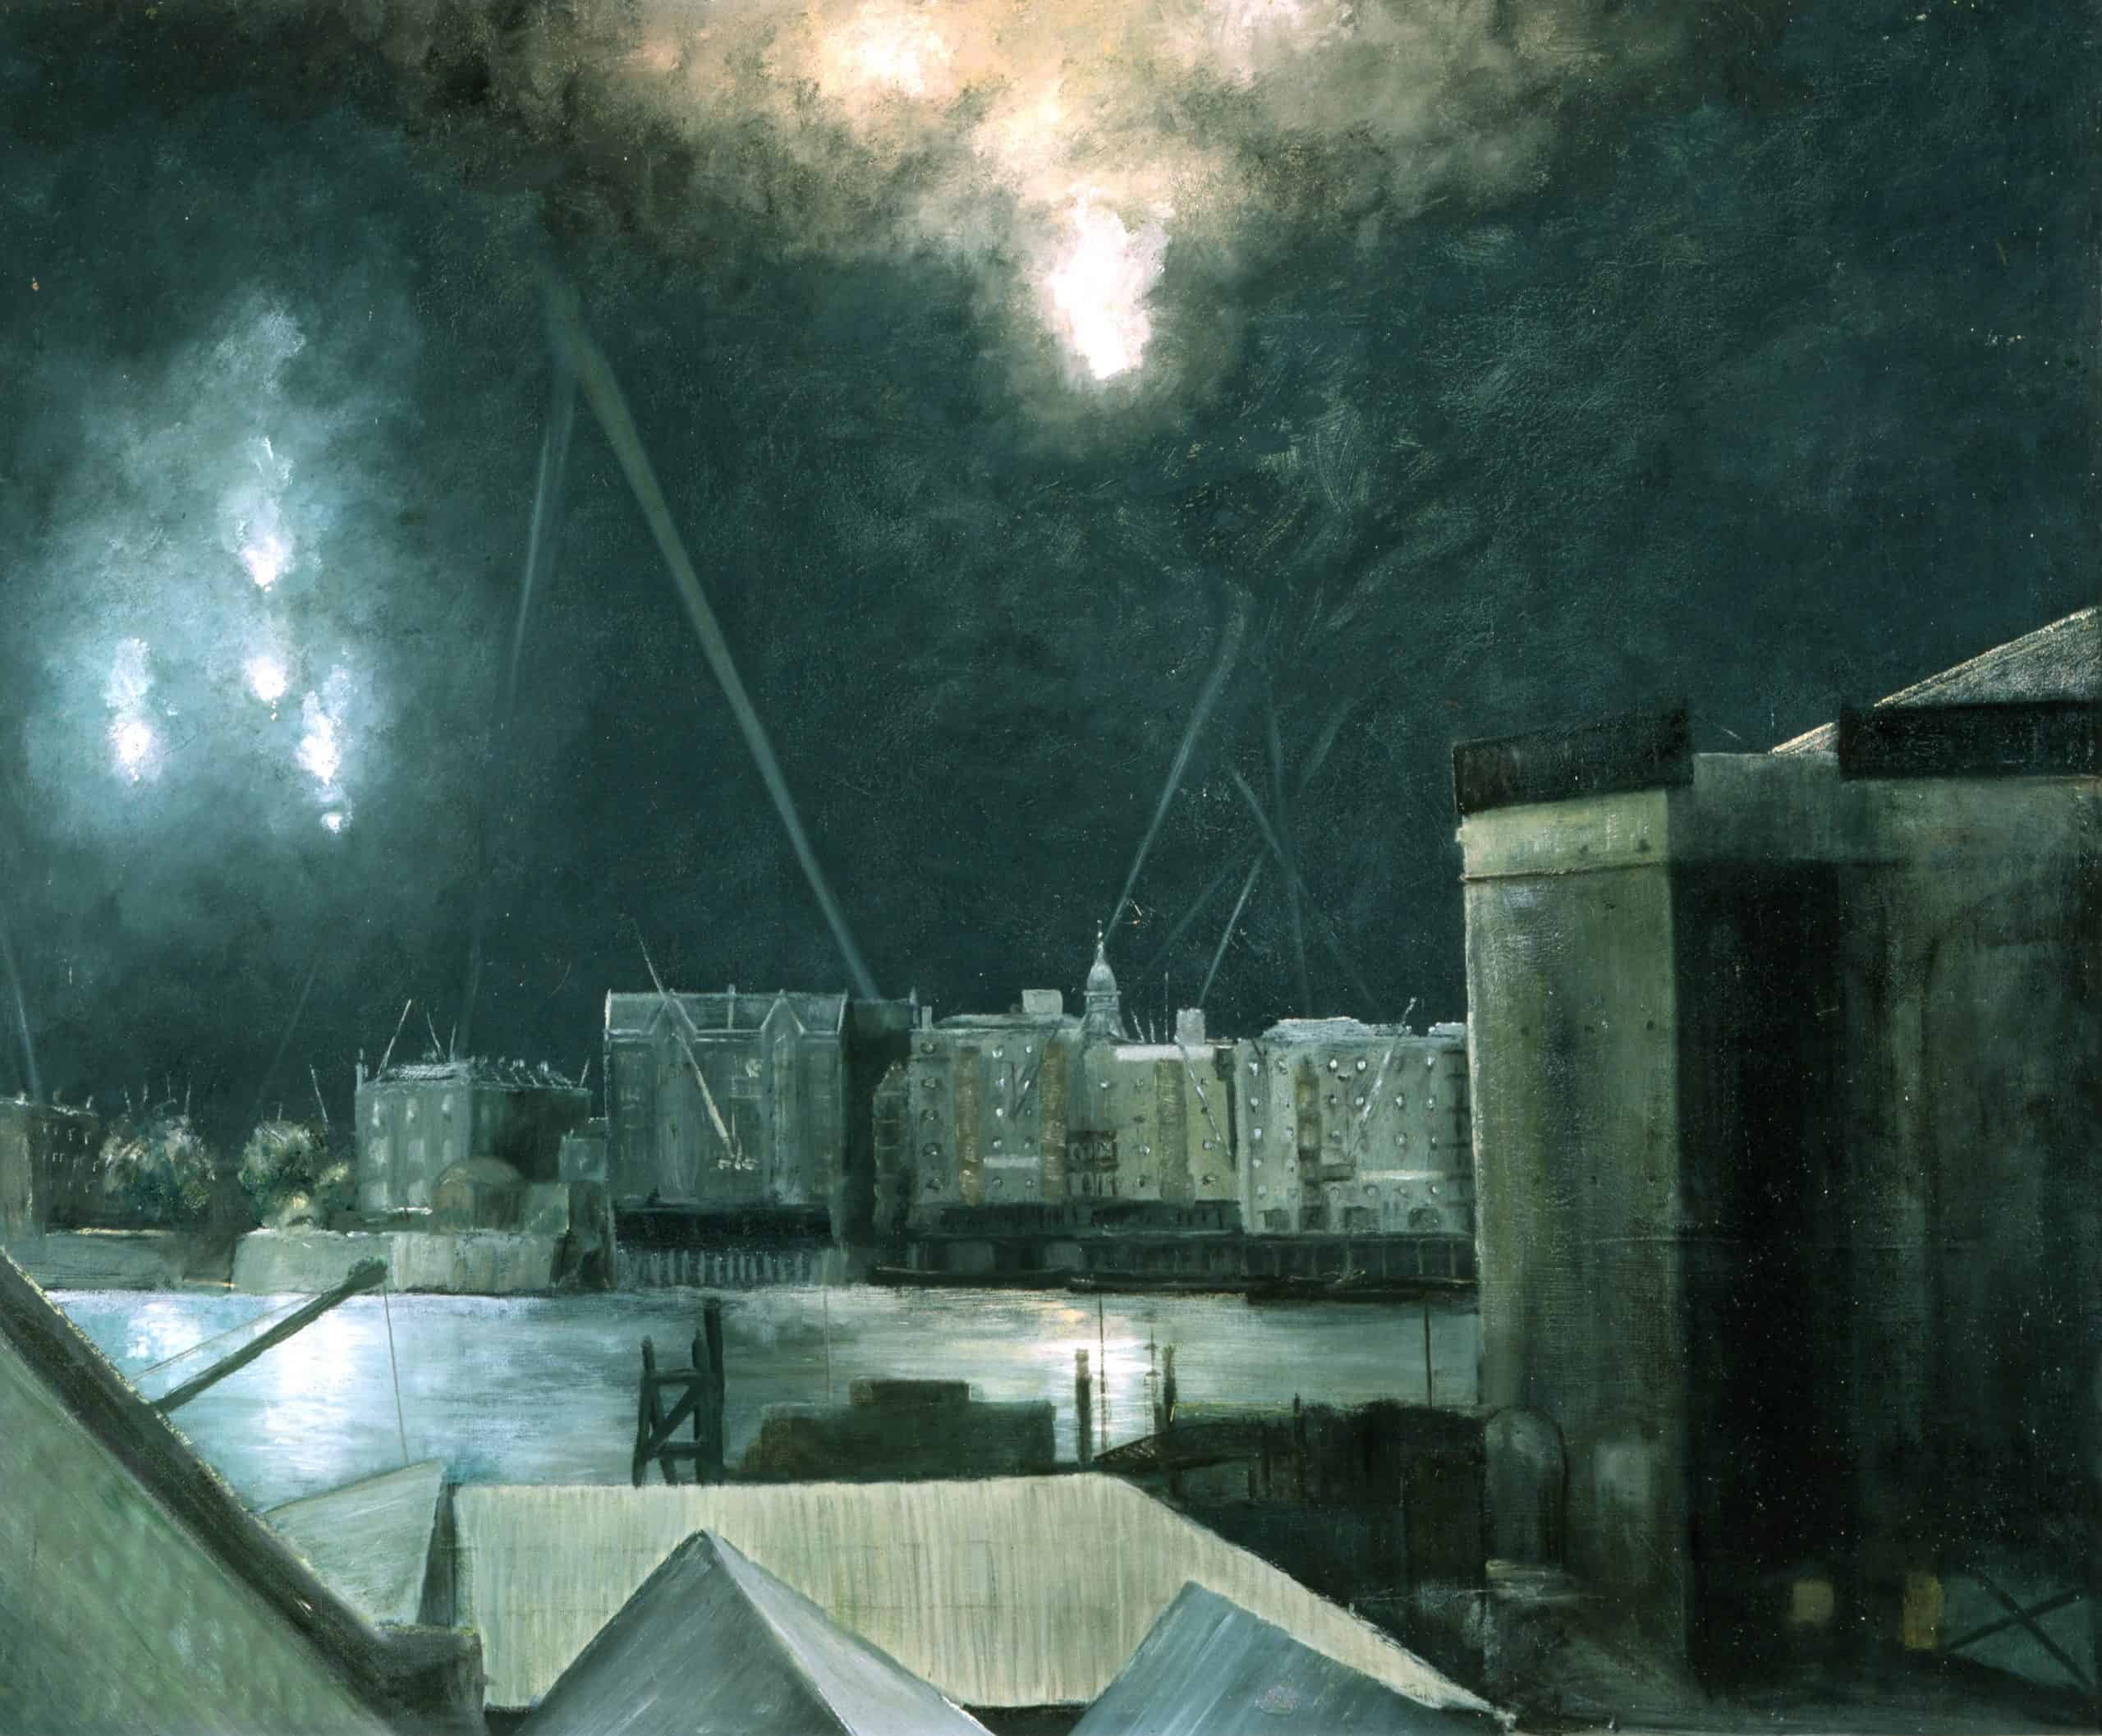 Night Raid over London Docklands
This is a dramatic view of a night time raid on the city, during the Second World War.  From Rotherhithe on the south bank, the scene looks towards Wapping and depicts parachute flares, deployed by German bombers, illuminating the sky.  They fall towards the Wapping entrance of the London Docks, seen in the background on the far left, as searchlights criss-cross the night sky.